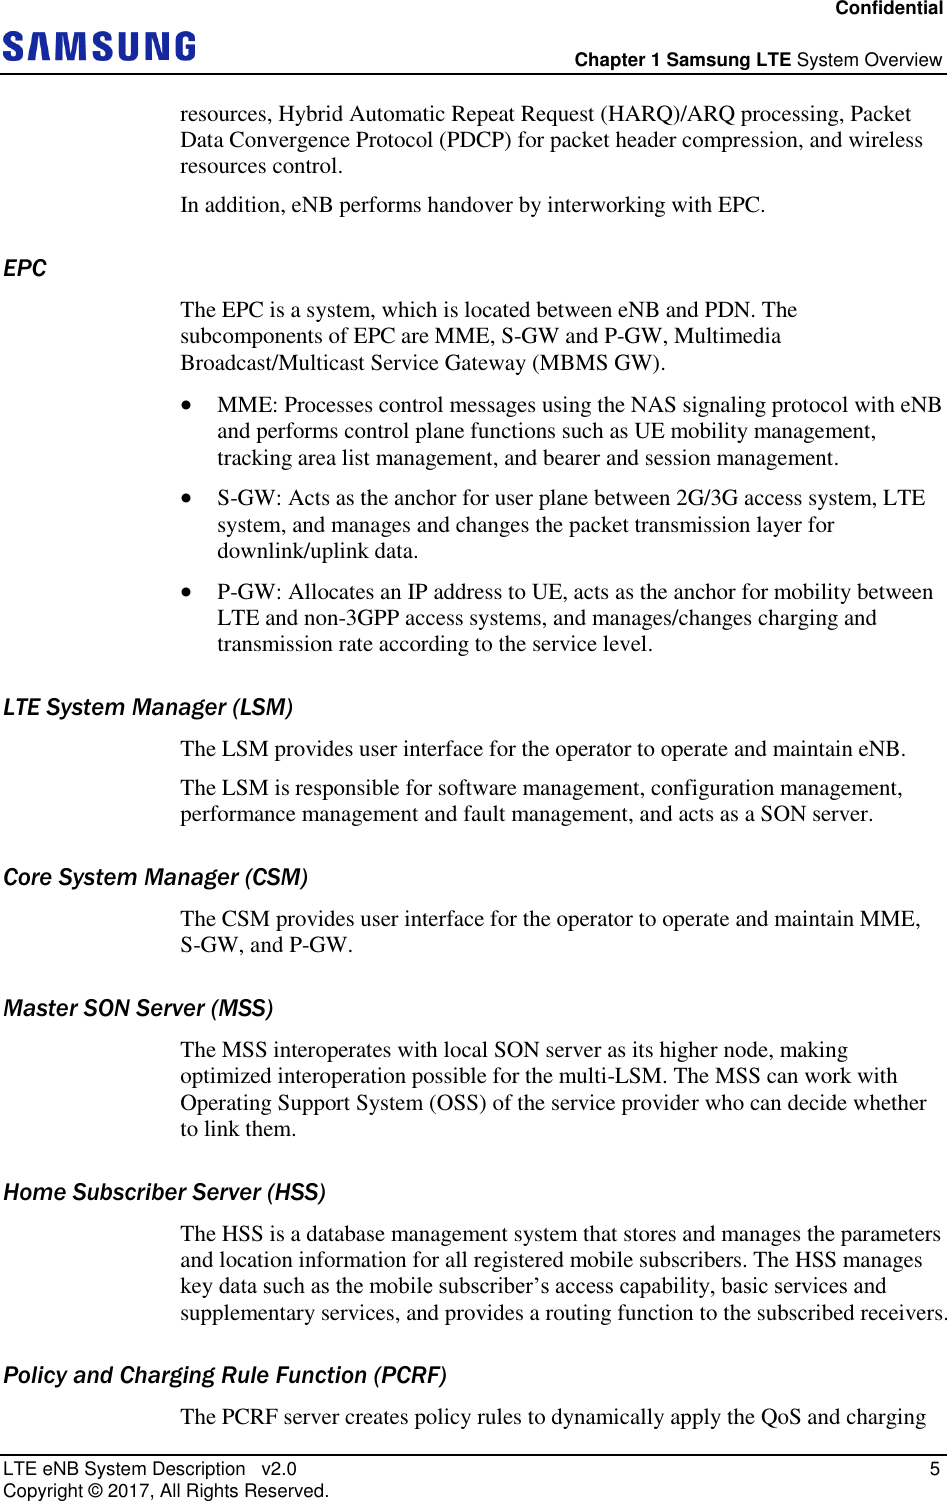 Confidential  Chapter 1 Samsung LTE System Overview LTE eNB System Description   v2.0    5 Copyright ©  2017, All Rights Reserved. resources, Hybrid Automatic Repeat Request (HARQ)/ARQ processing, Packet Data Convergence Protocol (PDCP) for packet header compression, and wireless resources control. In addition, eNB performs handover by interworking with EPC. EPC The EPC is a system, which is located between eNB and PDN. The subcomponents of EPC are MME, S-GW and P-GW, Multimedia Broadcast/Multicast Service Gateway (MBMS GW).  MME: Processes control messages using the NAS signaling protocol with eNB and performs control plane functions such as UE mobility management, tracking area list management, and bearer and session management.  S-GW: Acts as the anchor for user plane between 2G/3G access system, LTE system, and manages and changes the packet transmission layer for downlink/uplink data.  P-GW: Allocates an IP address to UE, acts as the anchor for mobility between LTE and non-3GPP access systems, and manages/changes charging and transmission rate according to the service level. LTE System Manager (LSM) The LSM provides user interface for the operator to operate and maintain eNB. The LSM is responsible for software management, configuration management, performance management and fault management, and acts as a SON server. Core System Manager (CSM) The CSM provides user interface for the operator to operate and maintain MME, S-GW, and P-GW. Master SON Server (MSS) The MSS interoperates with local SON server as its higher node, making optimized interoperation possible for the multi-LSM. The MSS can work with Operating Support System (OSS) of the service provider who can decide whether to link them. Home Subscriber Server (HSS) The HSS is a database management system that stores and manages the parameters and location information for all registered mobile subscribers. The HSS manages key data such as the mobile subscriber’s access capability, basic services and supplementary services, and provides a routing function to the subscribed receivers. Policy and Charging Rule Function (PCRF) The PCRF server creates policy rules to dynamically apply the QoS and charging 